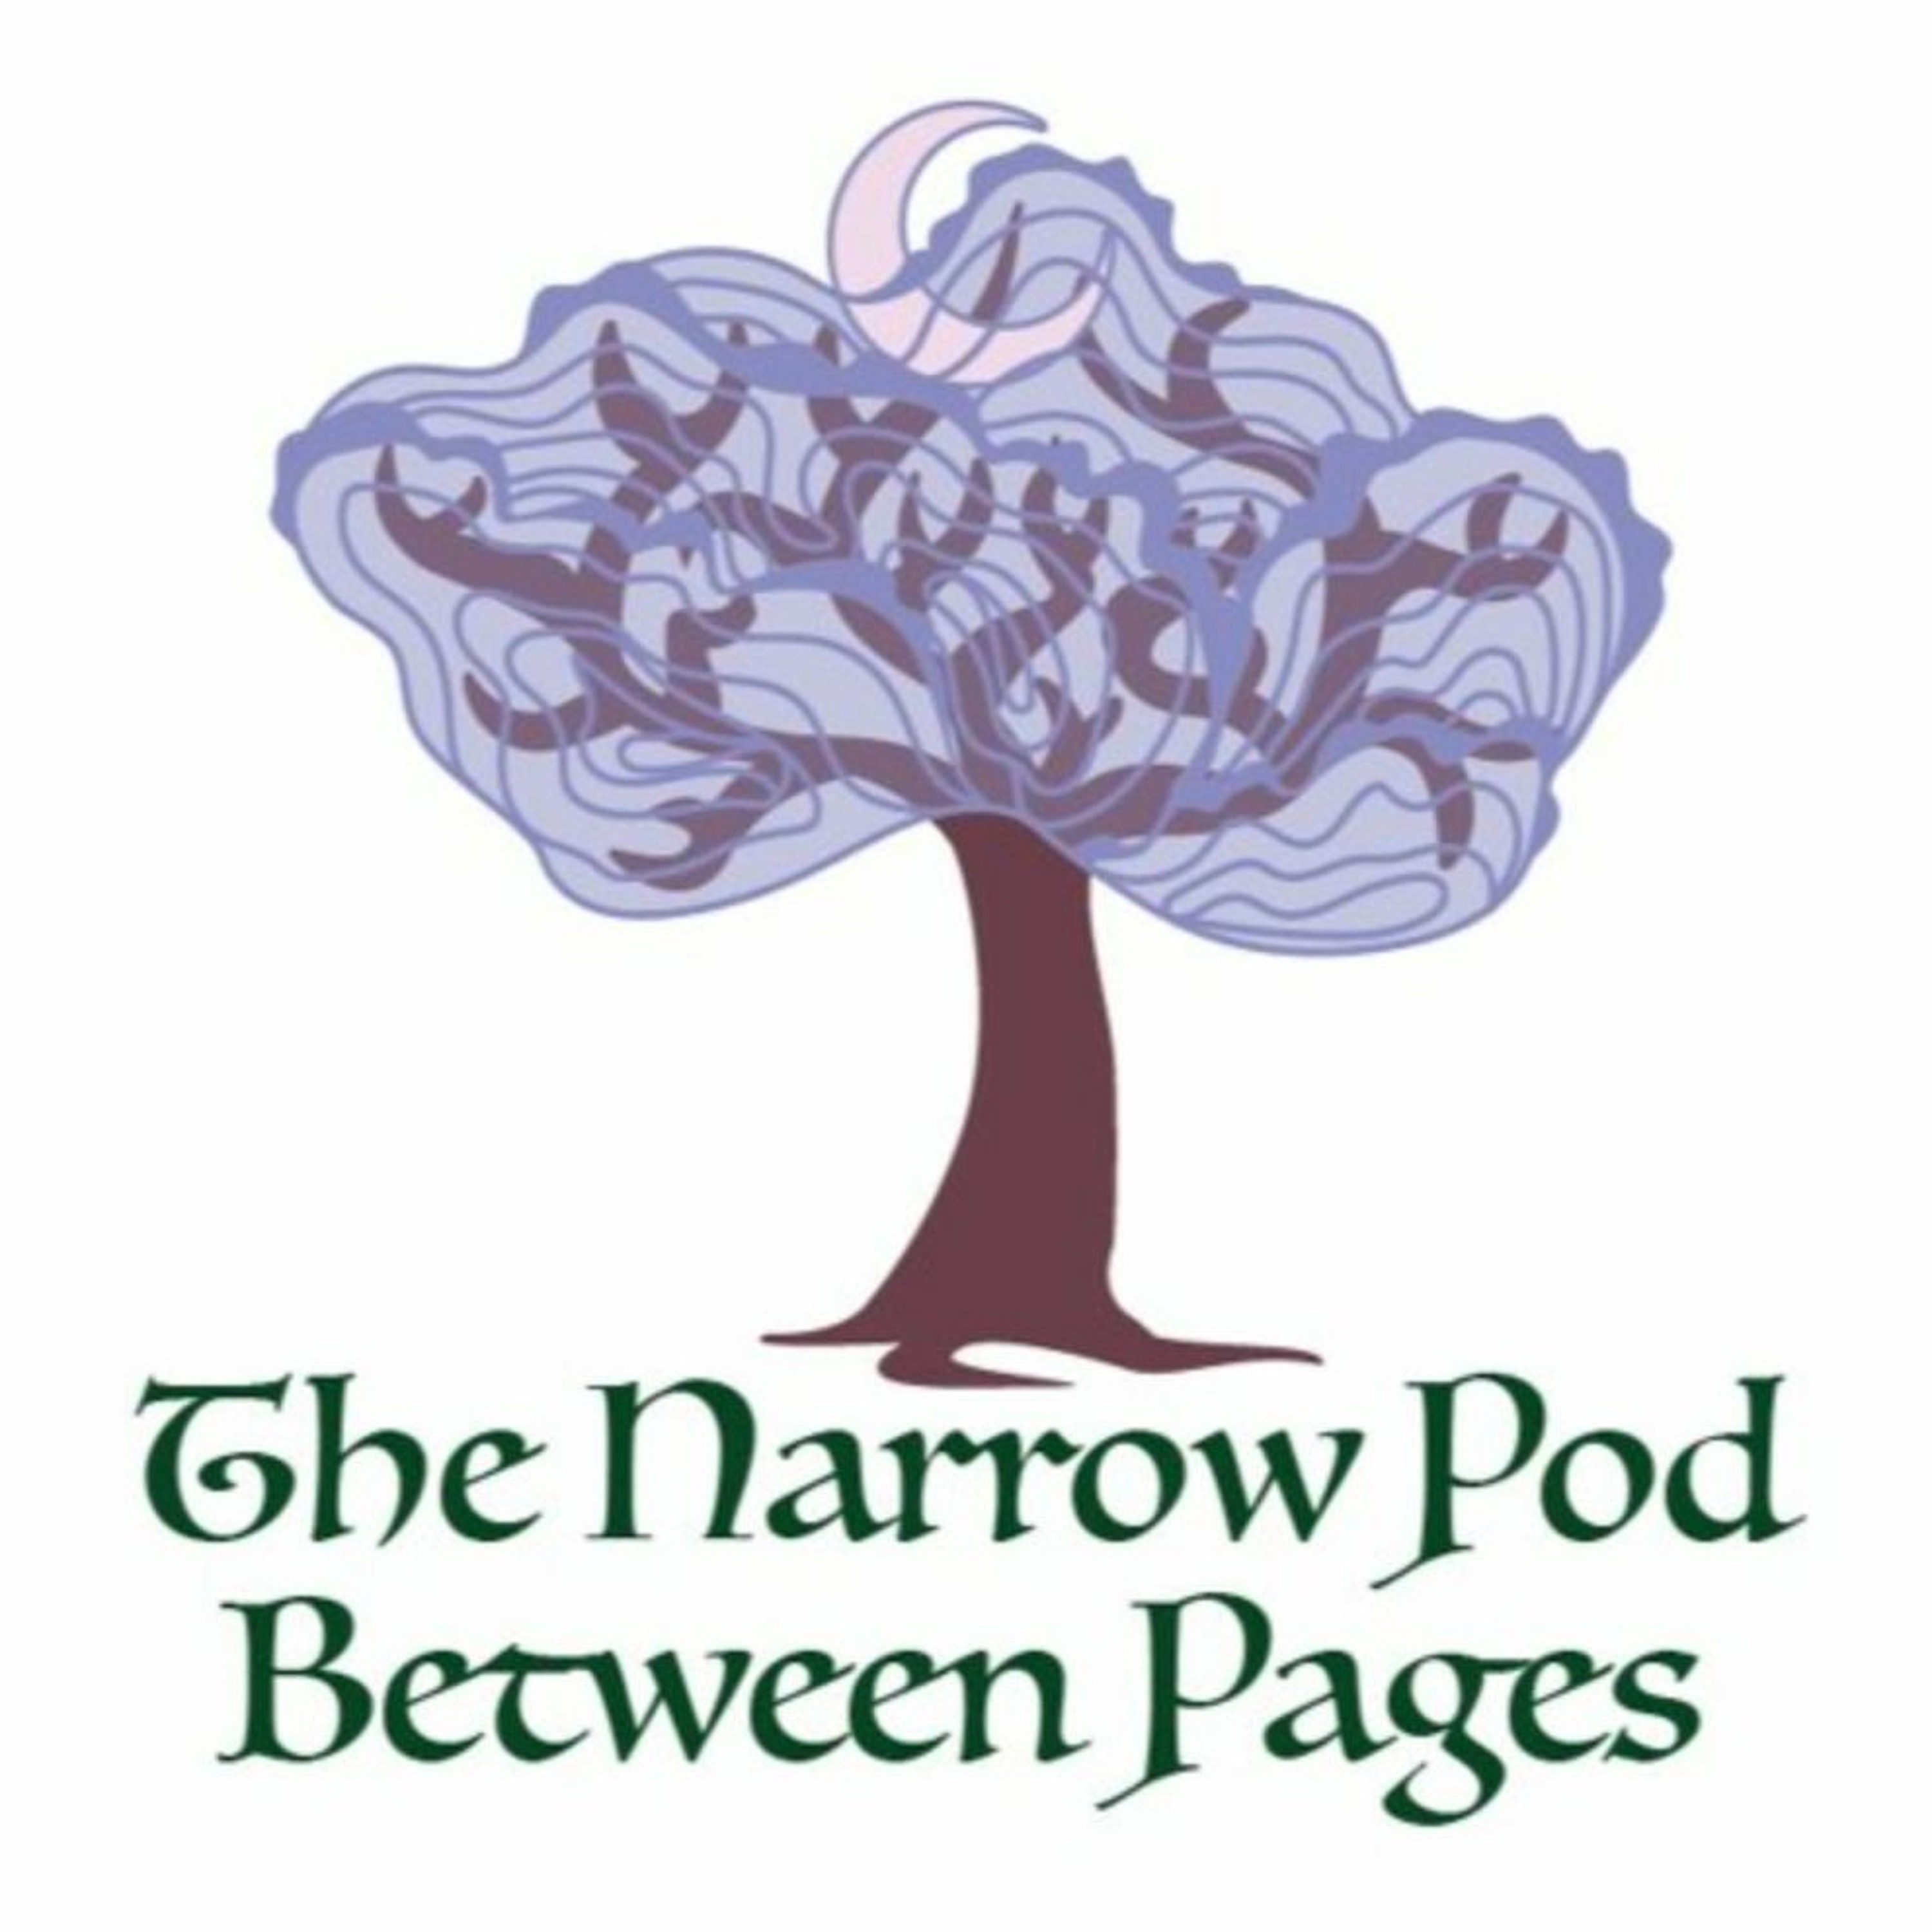 The Narrow Pod Between Pages - Page 204-205: Milkmaid, Milkmaid